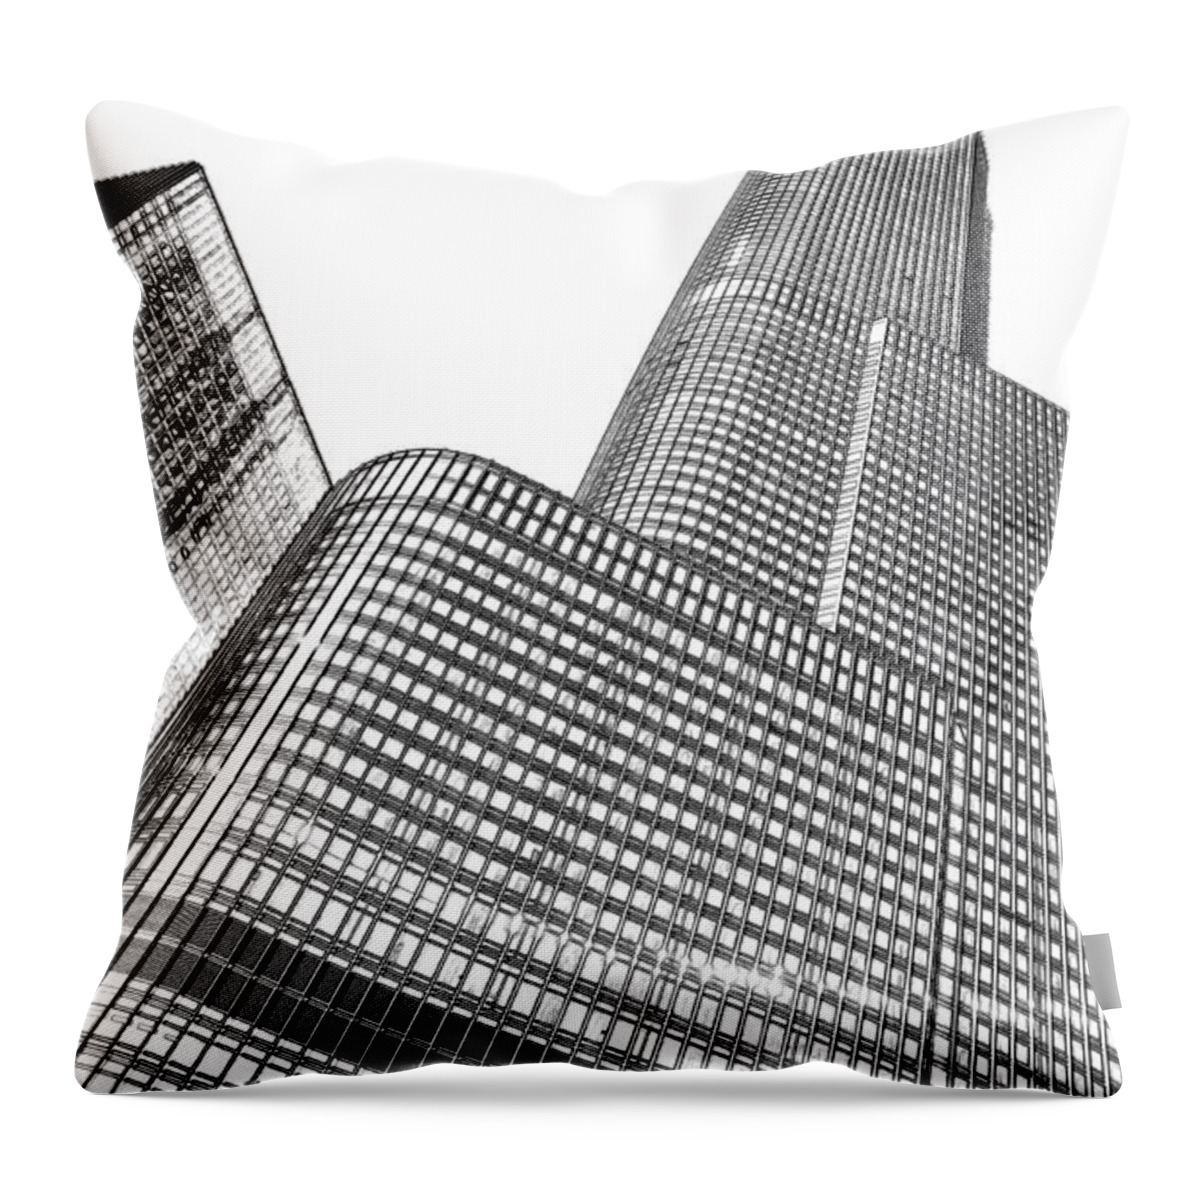 Chicago Downtown Throw Pillow featuring the digital art Chicago Downtown by Dejan Jovanovic